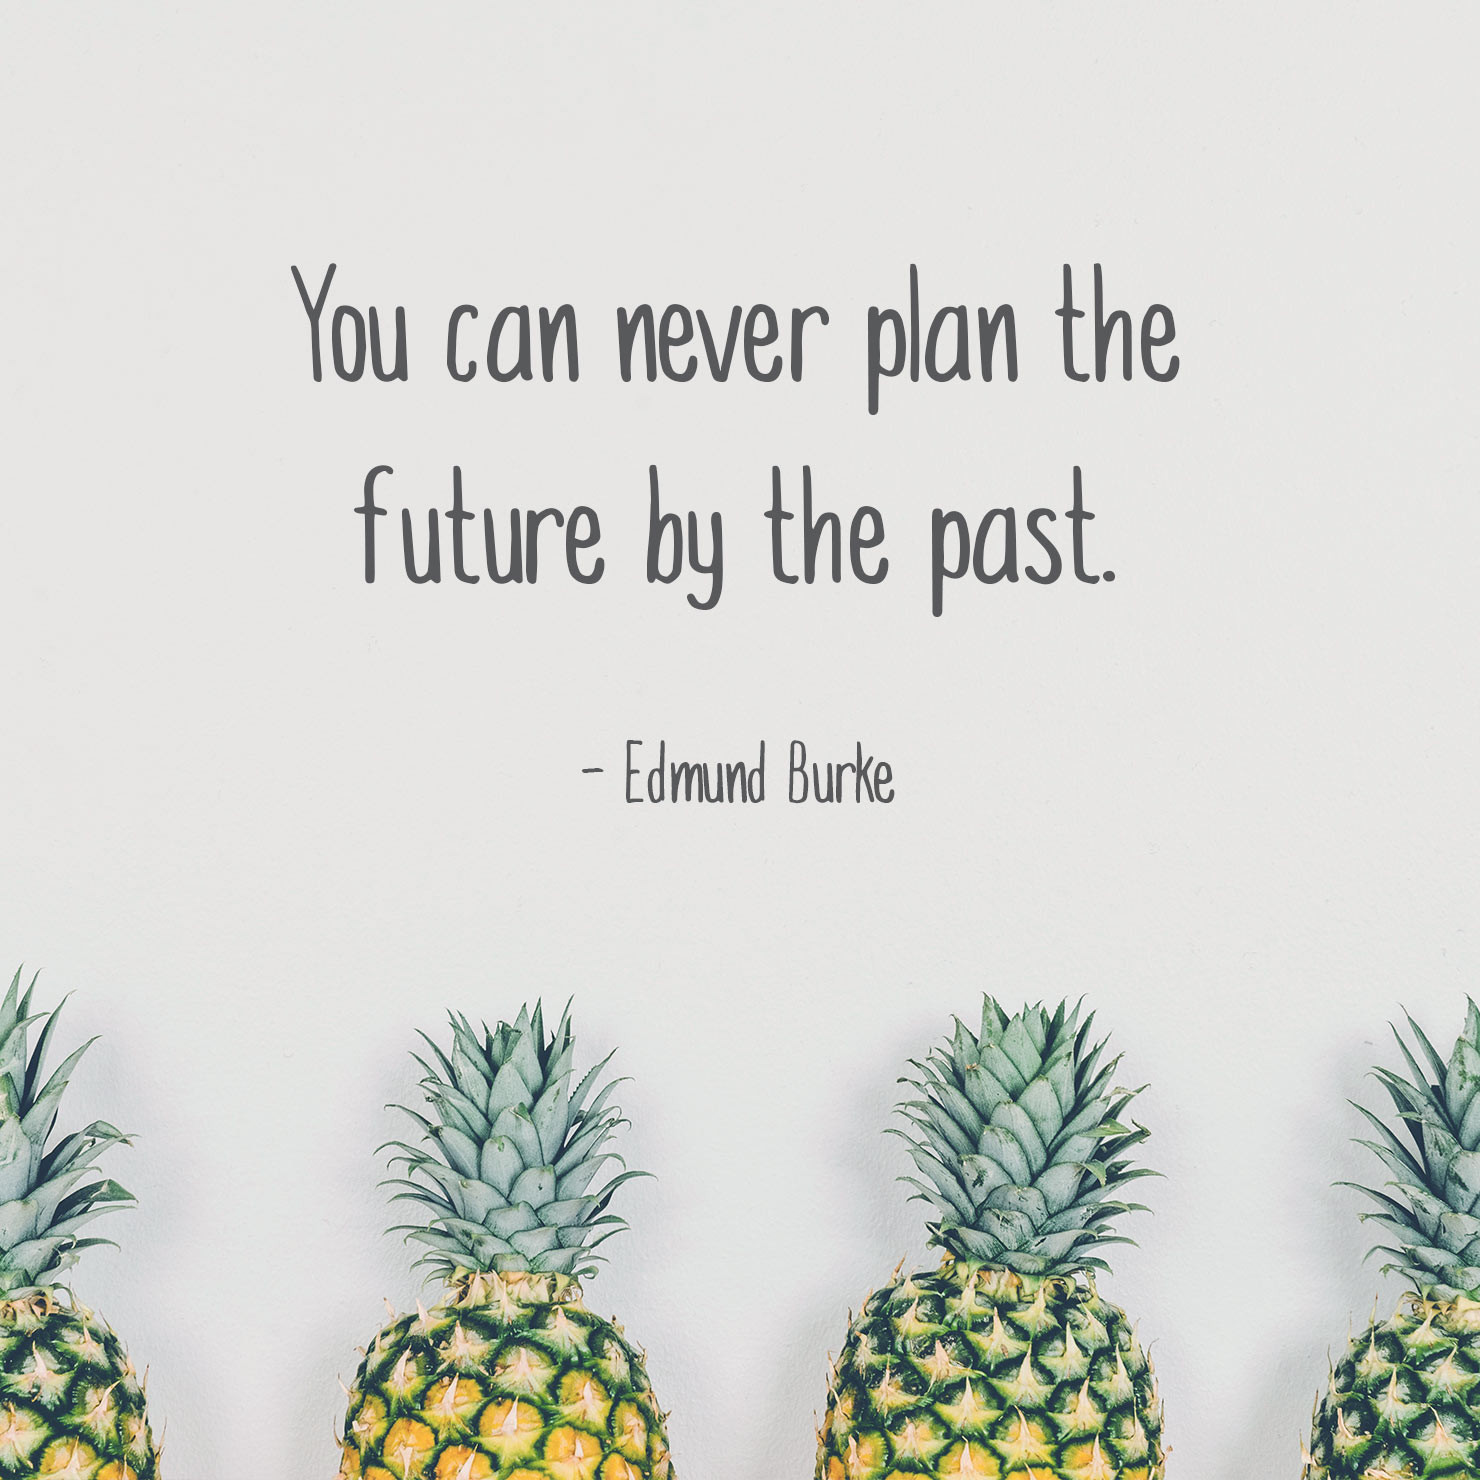 Quotes Graduation
 Graduation Quotes and Sayings For 2019